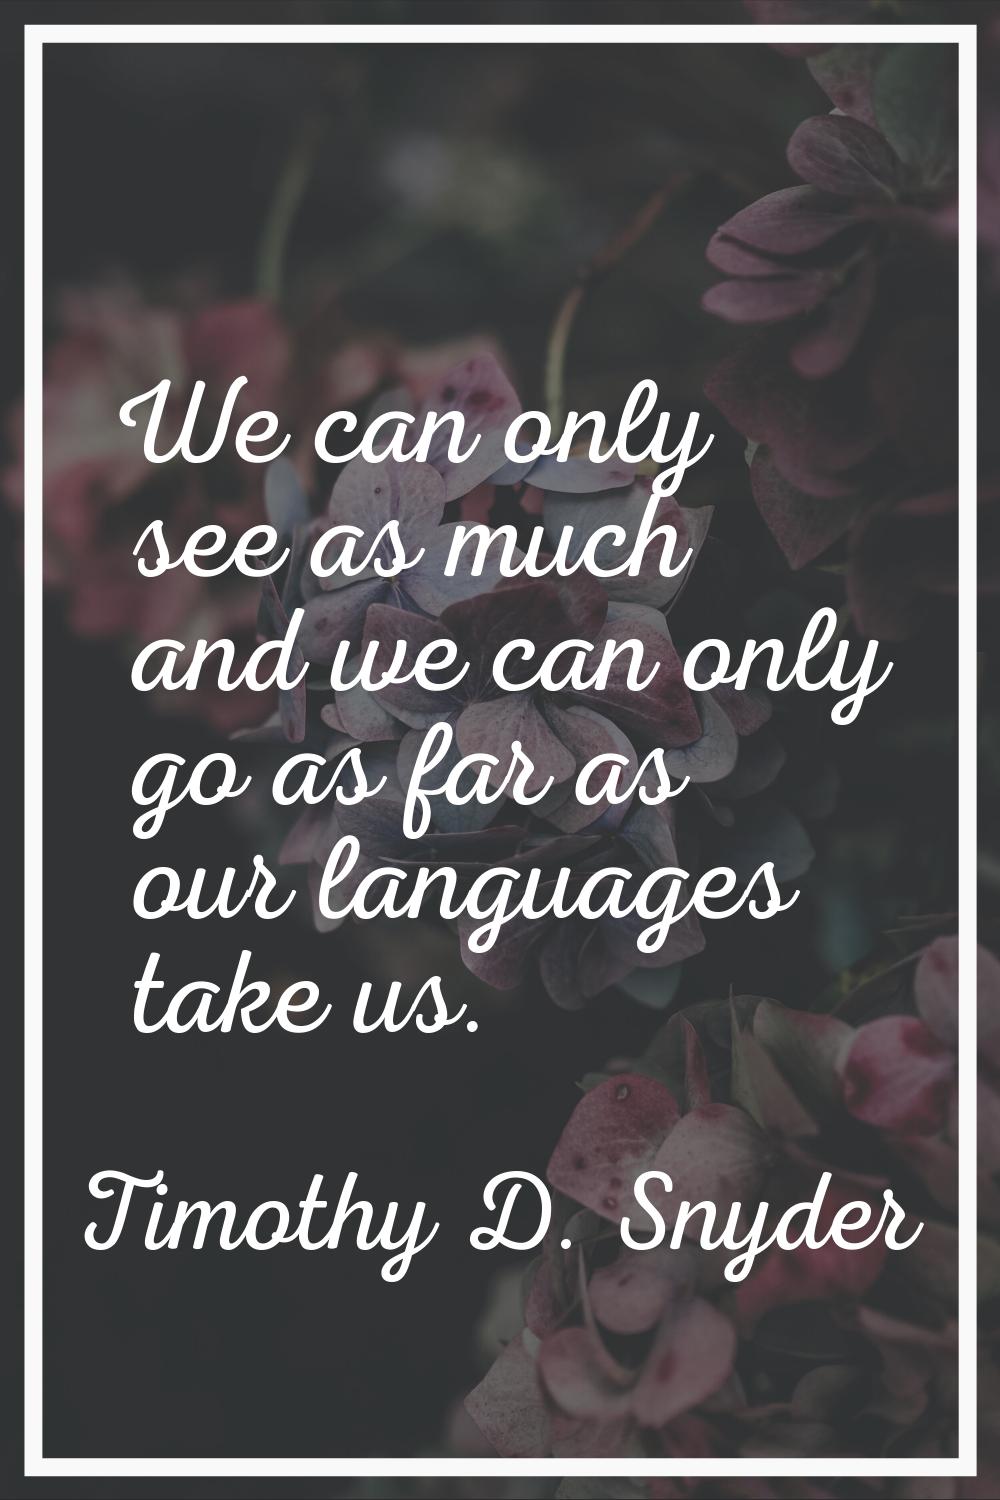 We can only see as much and we can only go as far as our languages take us.